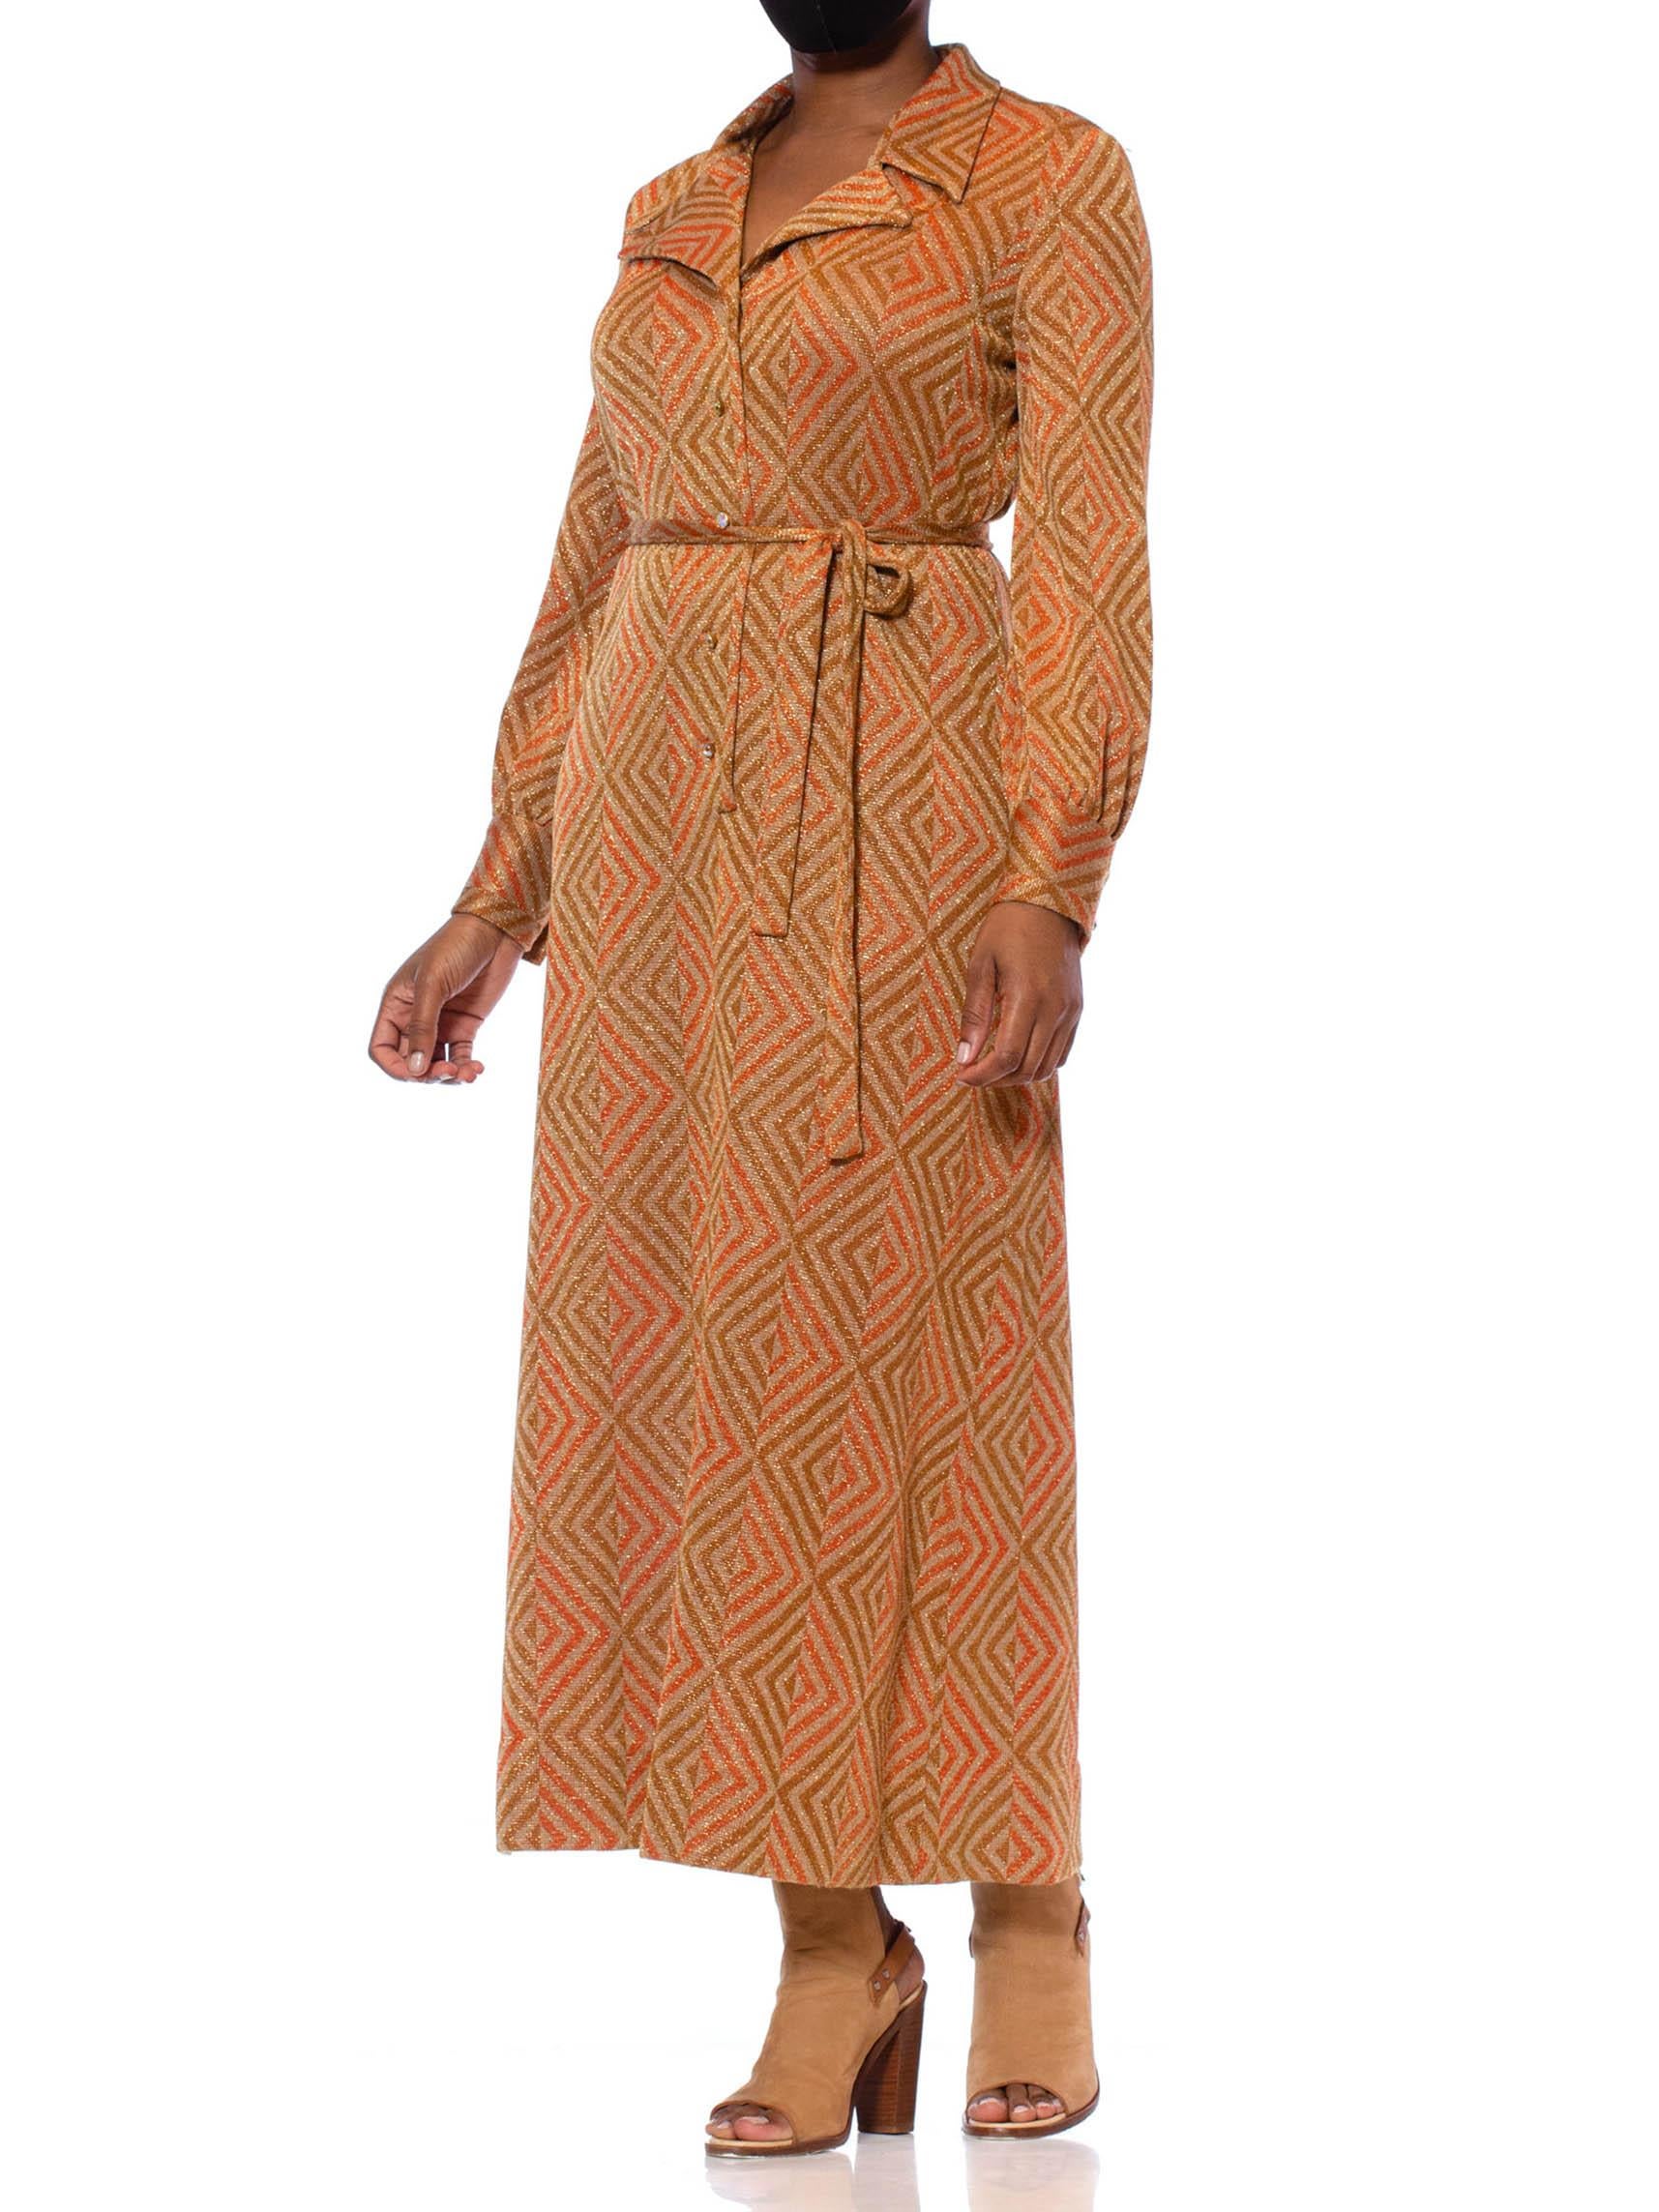 1970S Cinnamon Brown & Orange Poly/Lurex Double Knit Long Sleeved Maxi Cocktail 6